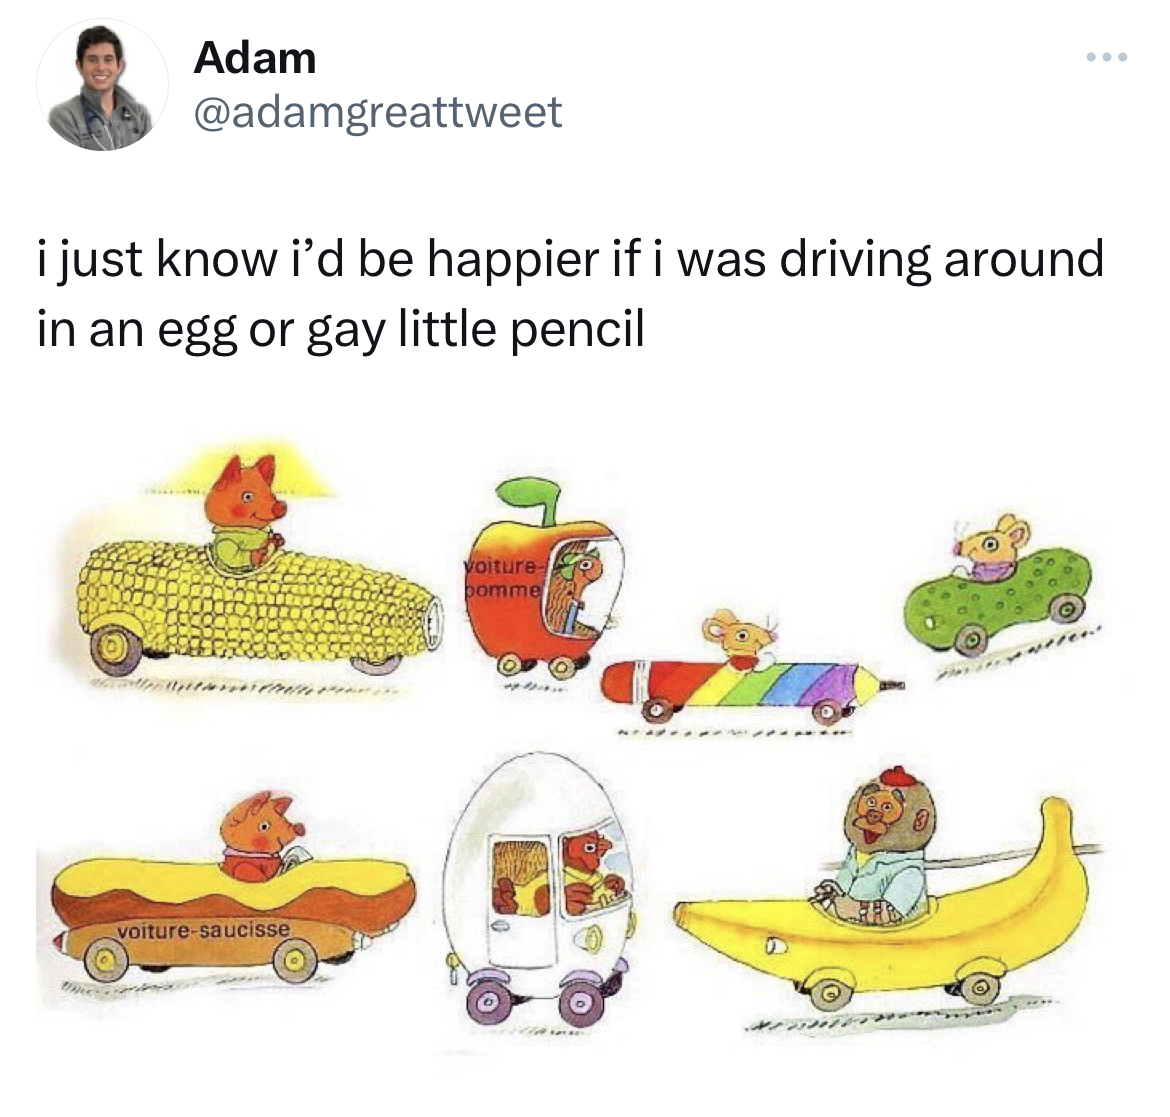 savage tweets - pig in car richard scarry - Adam i just know i'd be happier if i was driving around in an egg or gay little pencil voituresaucisse voiture pomme